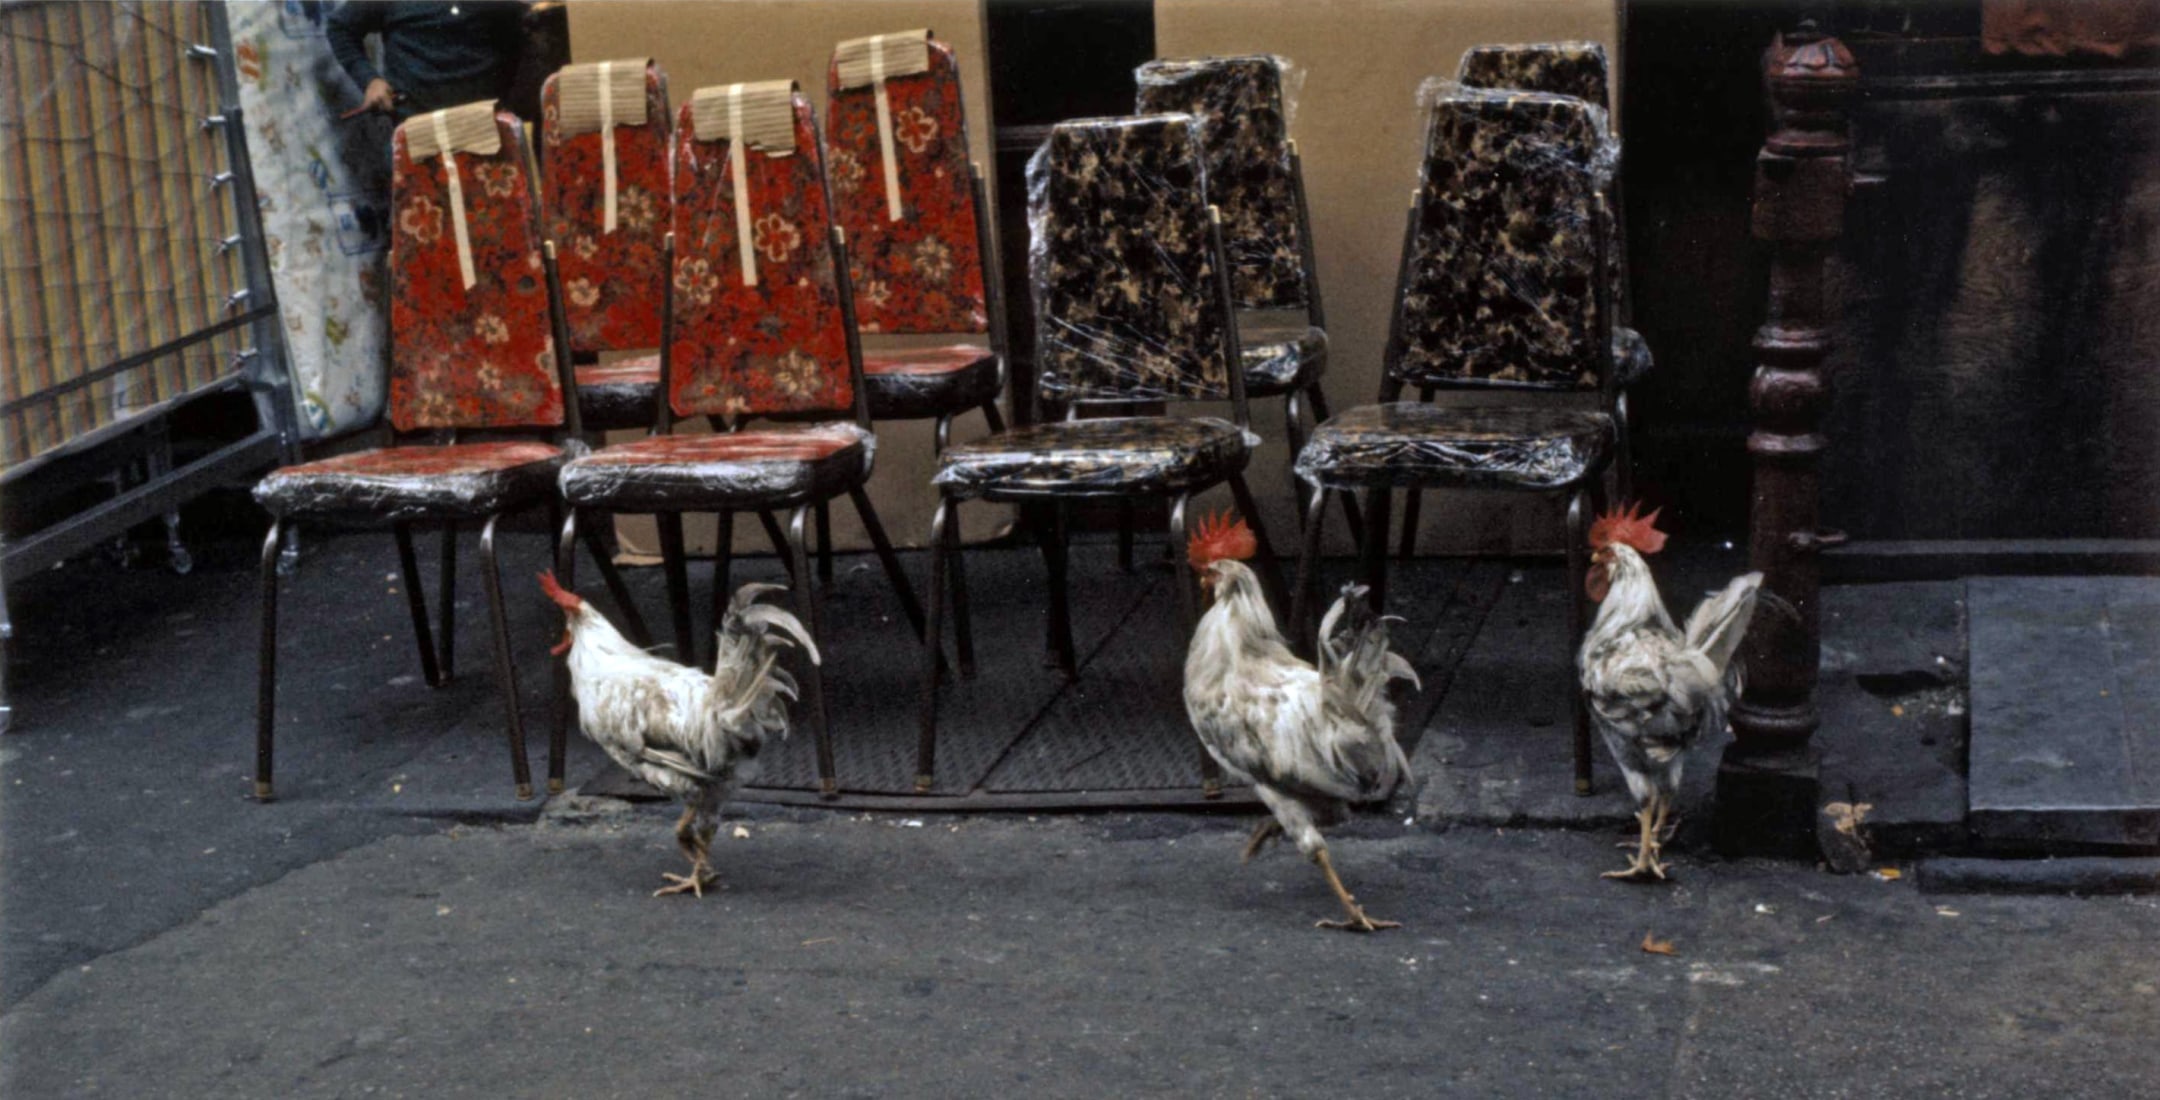 Color photo of three rosters walking on a city sidewalk in front of rows of restaurant chairs with floral print upholstery.